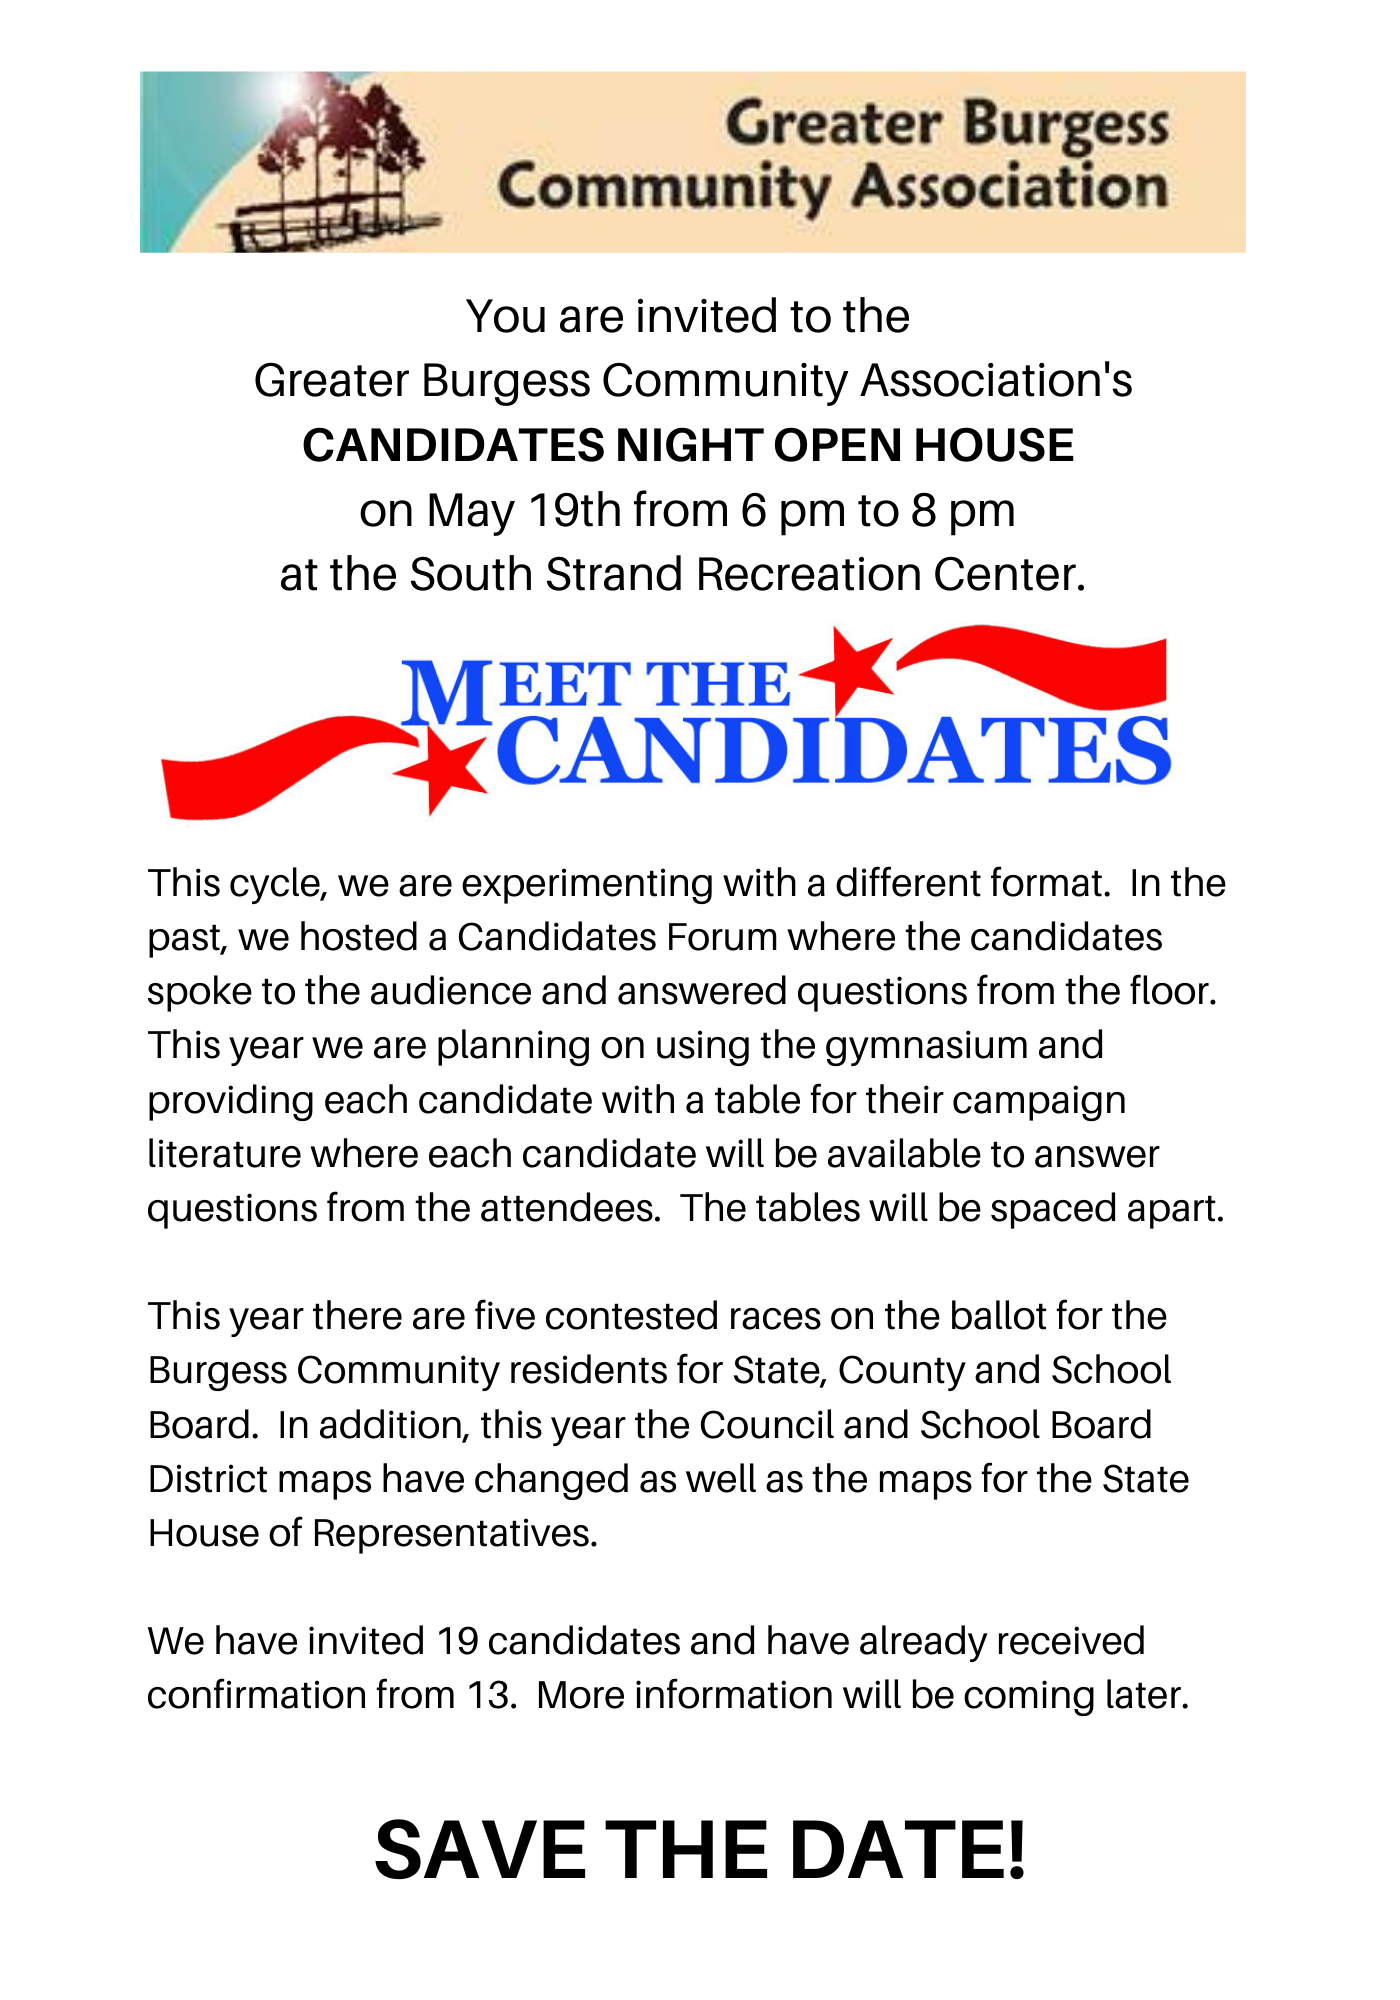 CANDIDATES NIGHT OPEN HOUSE